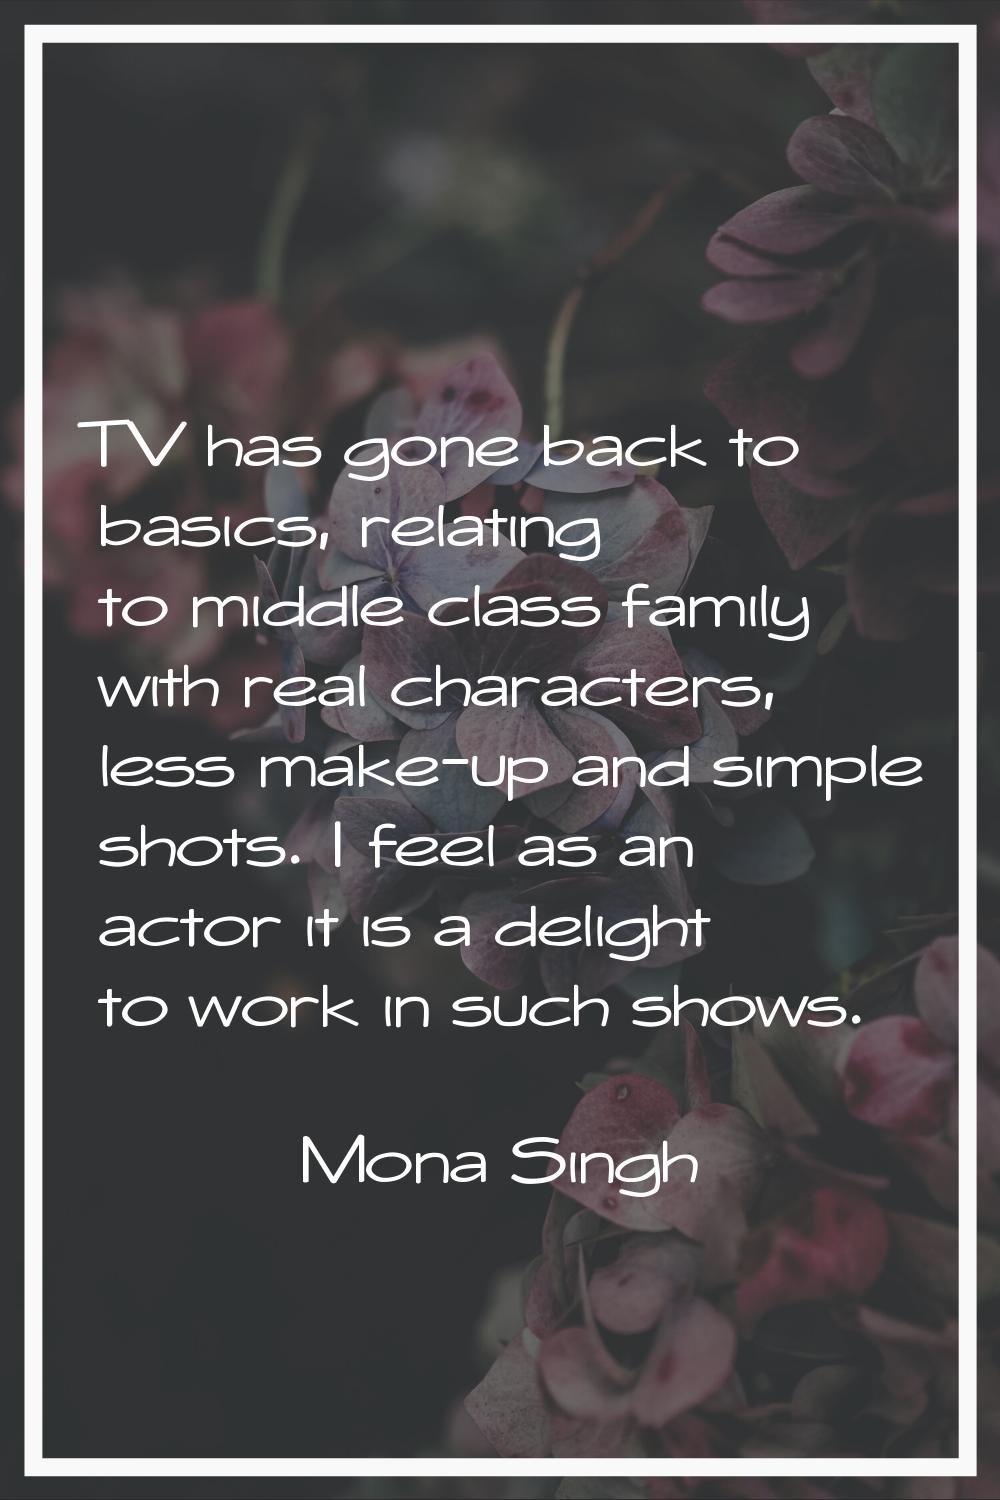 TV has gone back to basics, relating to middle class family with real characters, less make-up and 